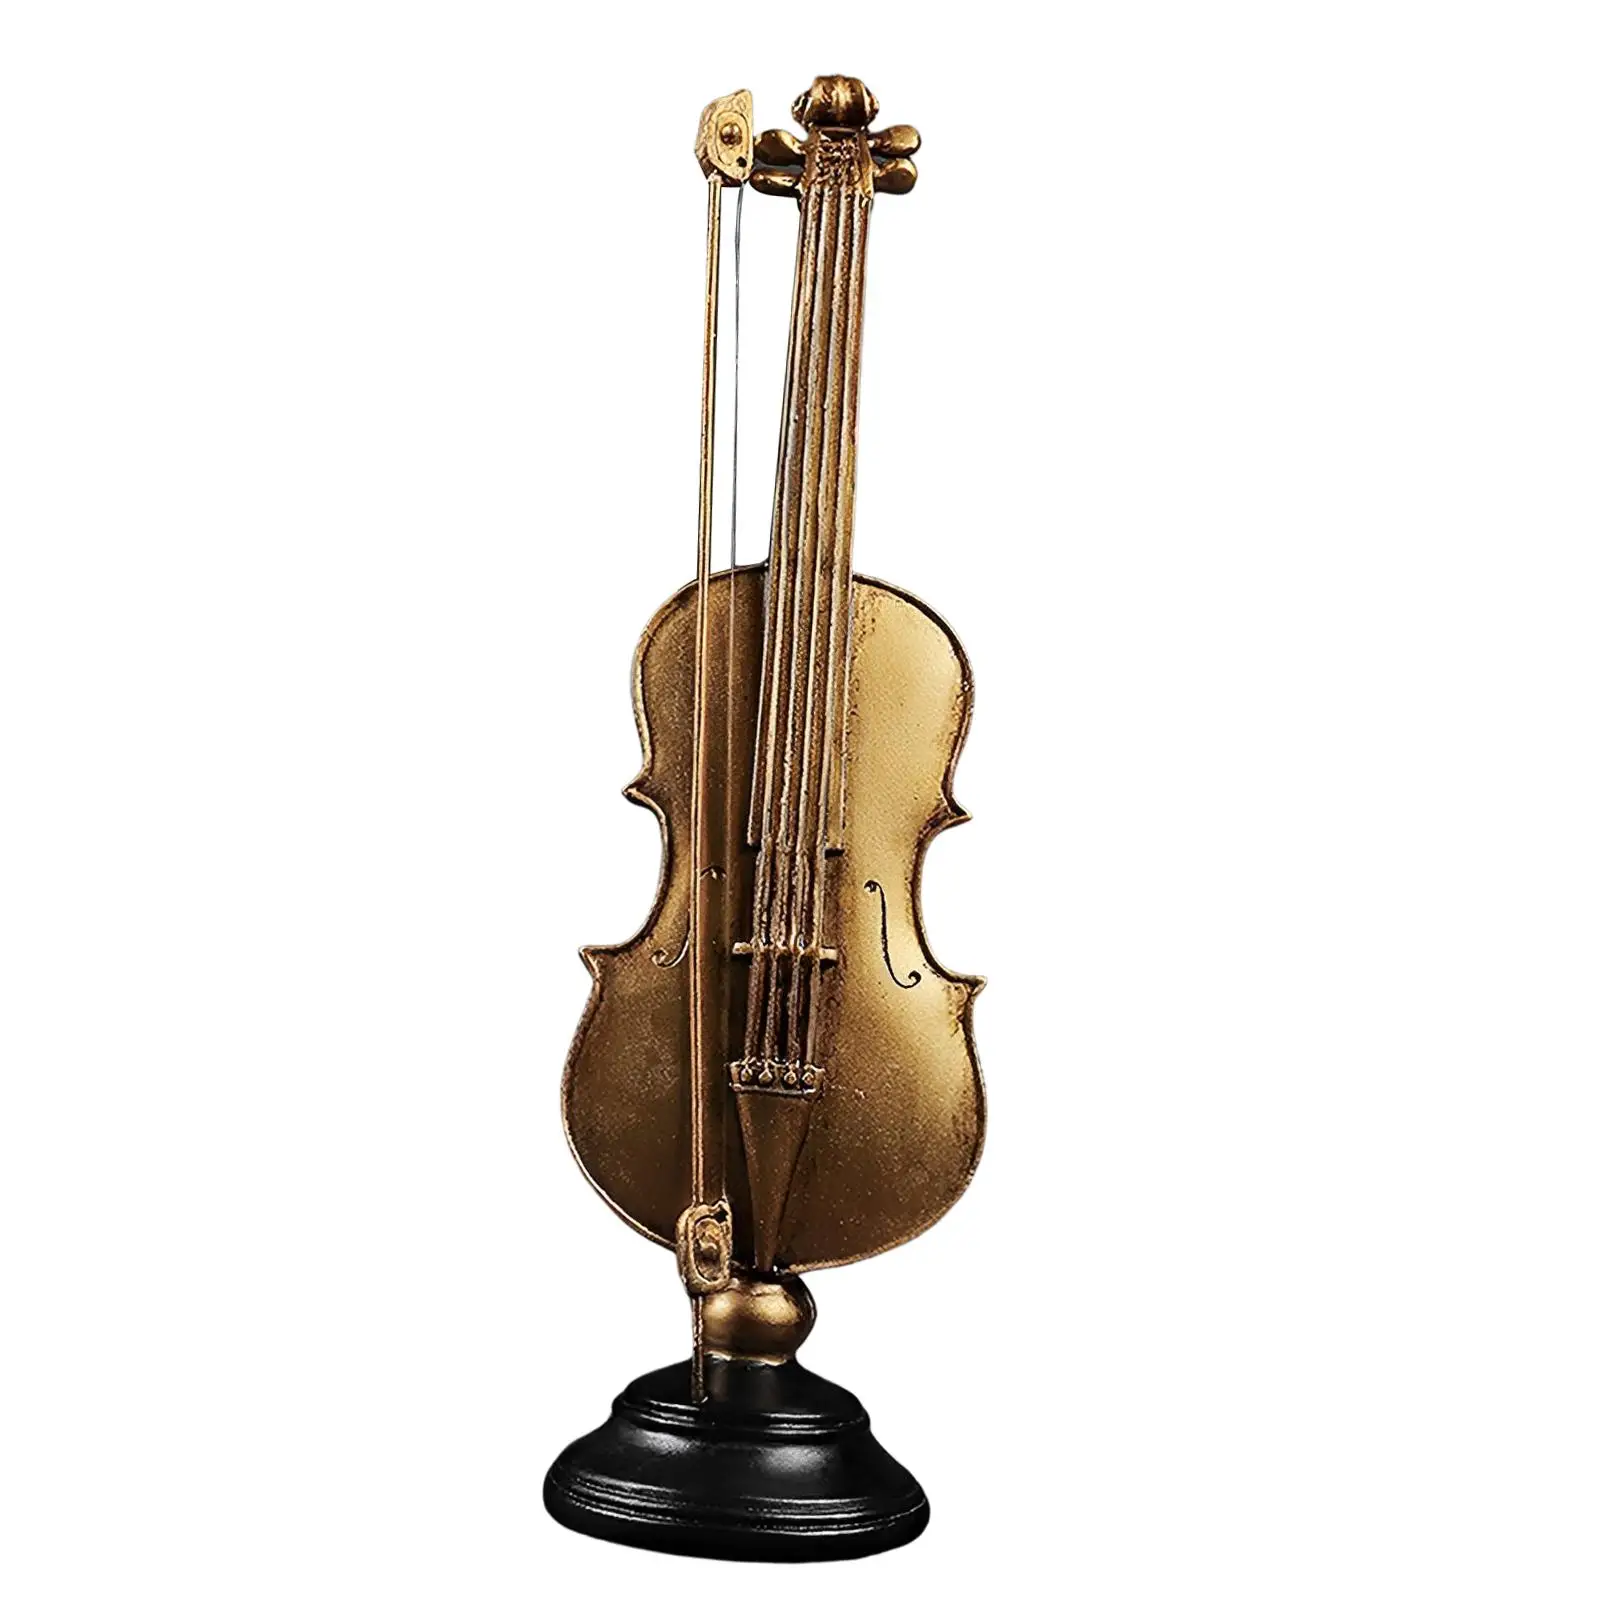 Violin Model Musical Instrument Model Collection Decorative Ornament Home Room Decoration With Gift Box